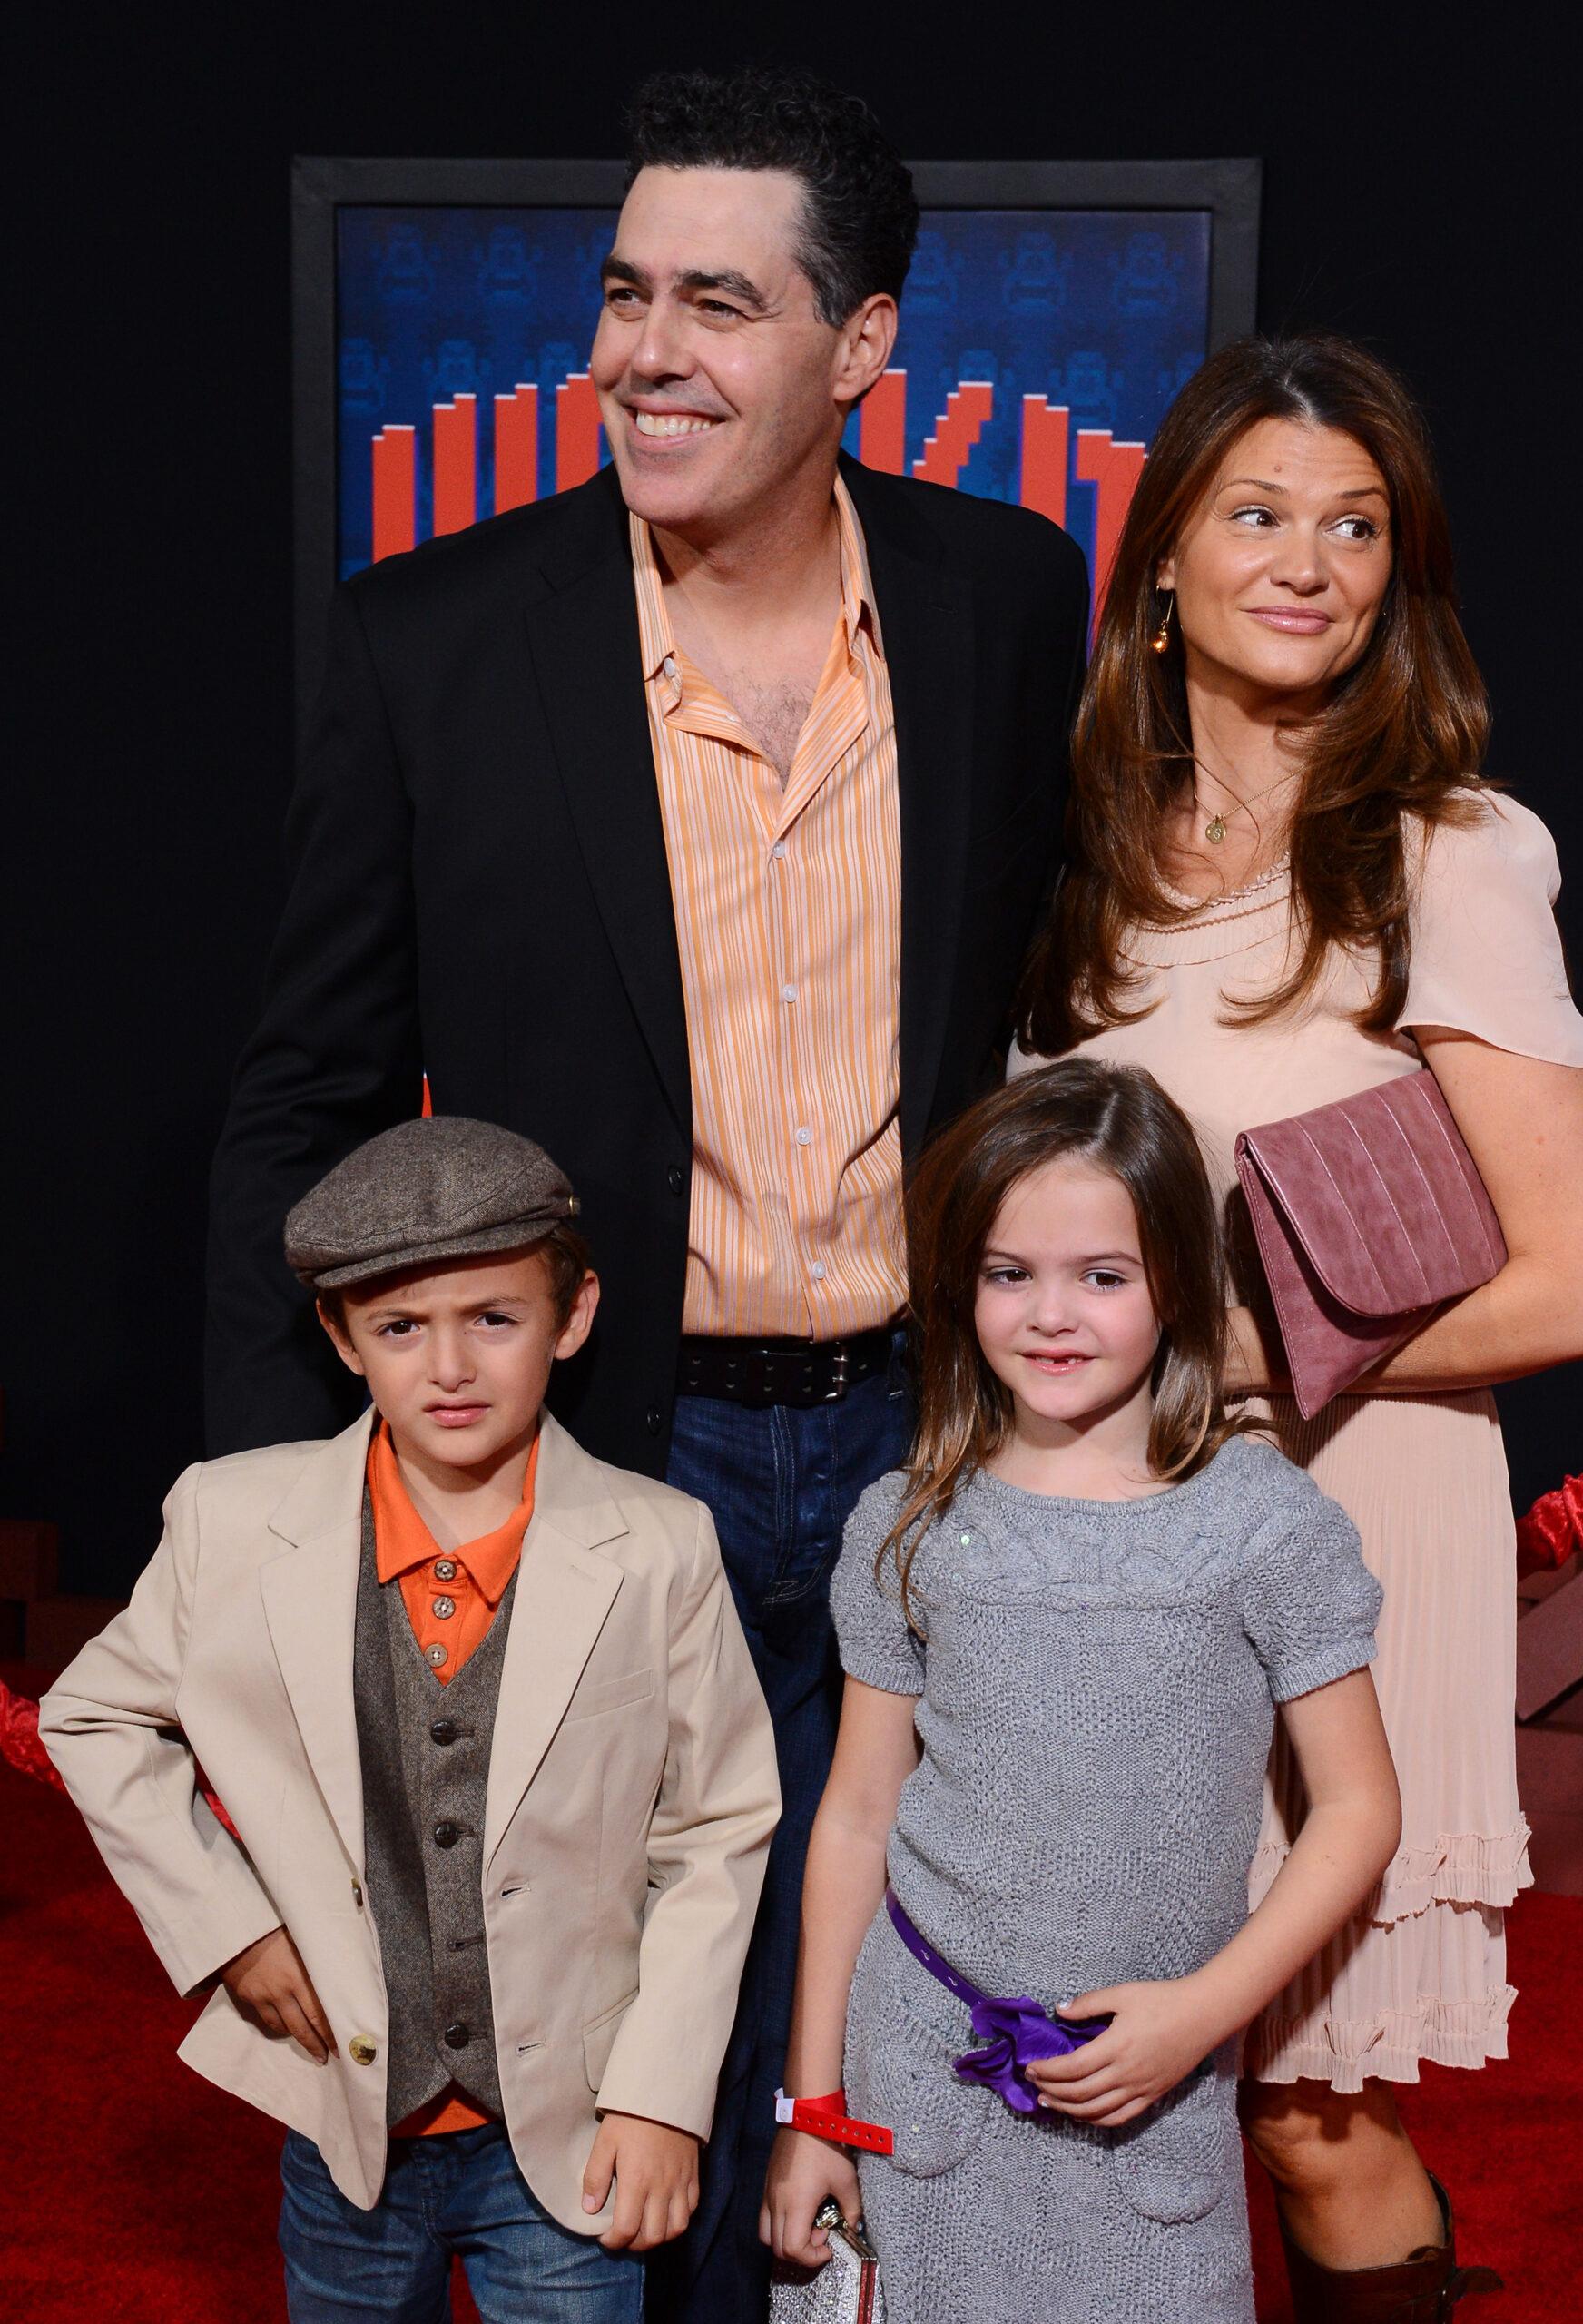 Adam Carolla's Ex-Wife Responds To Divorce: I Want Joint Custody Of Our Kids